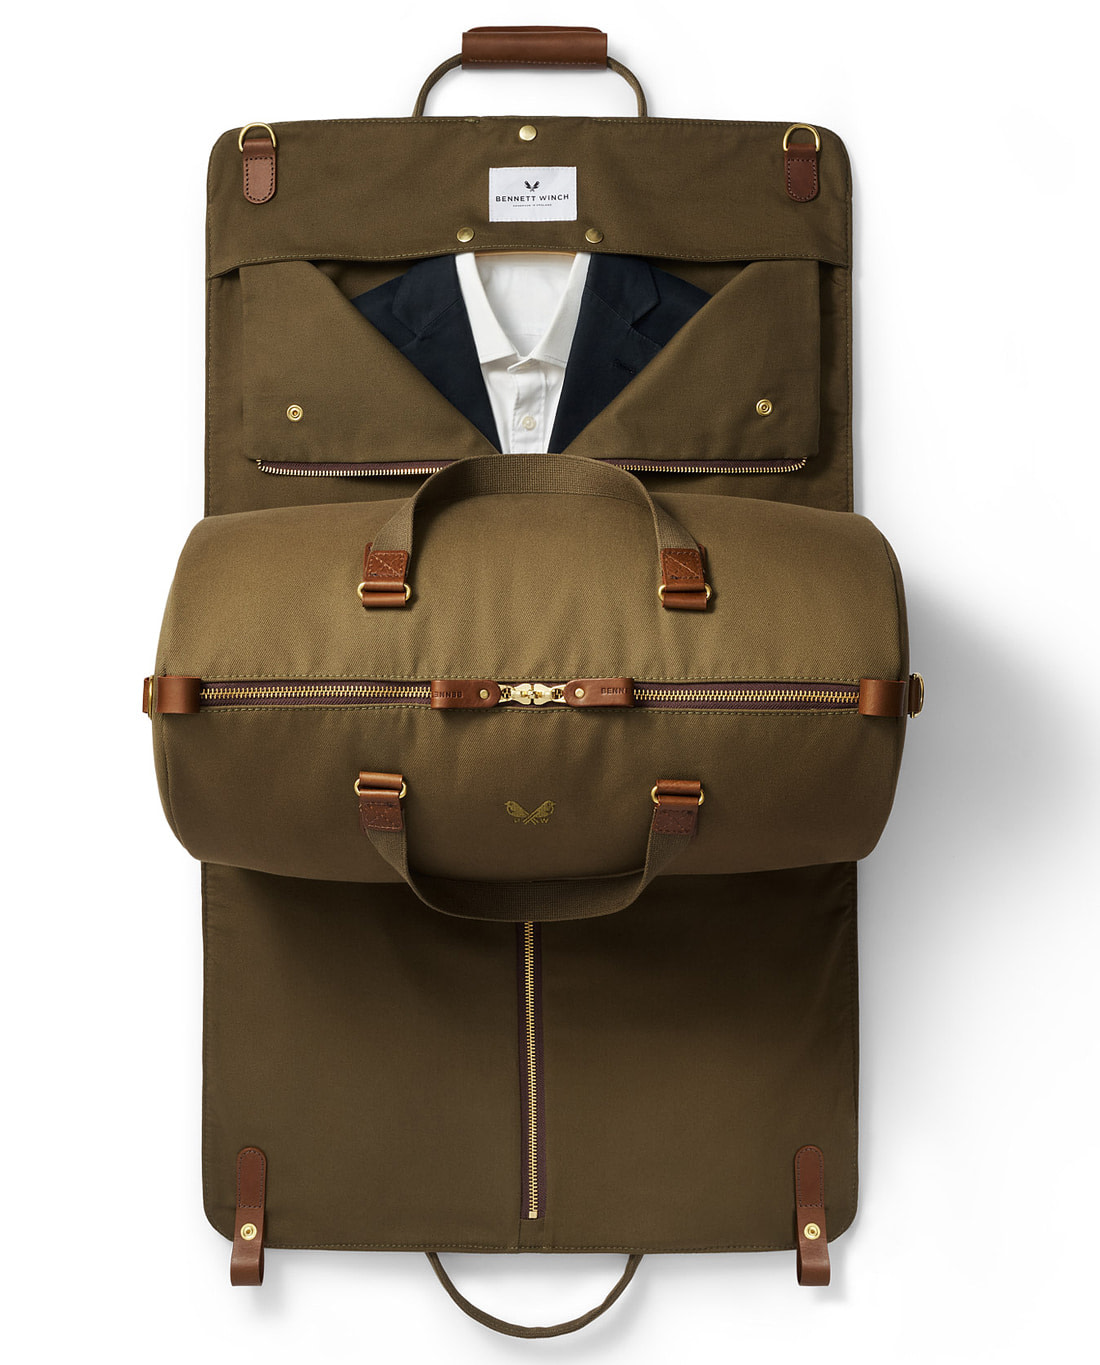 The 10 best garment bags for wrinkle-free travels in 2023